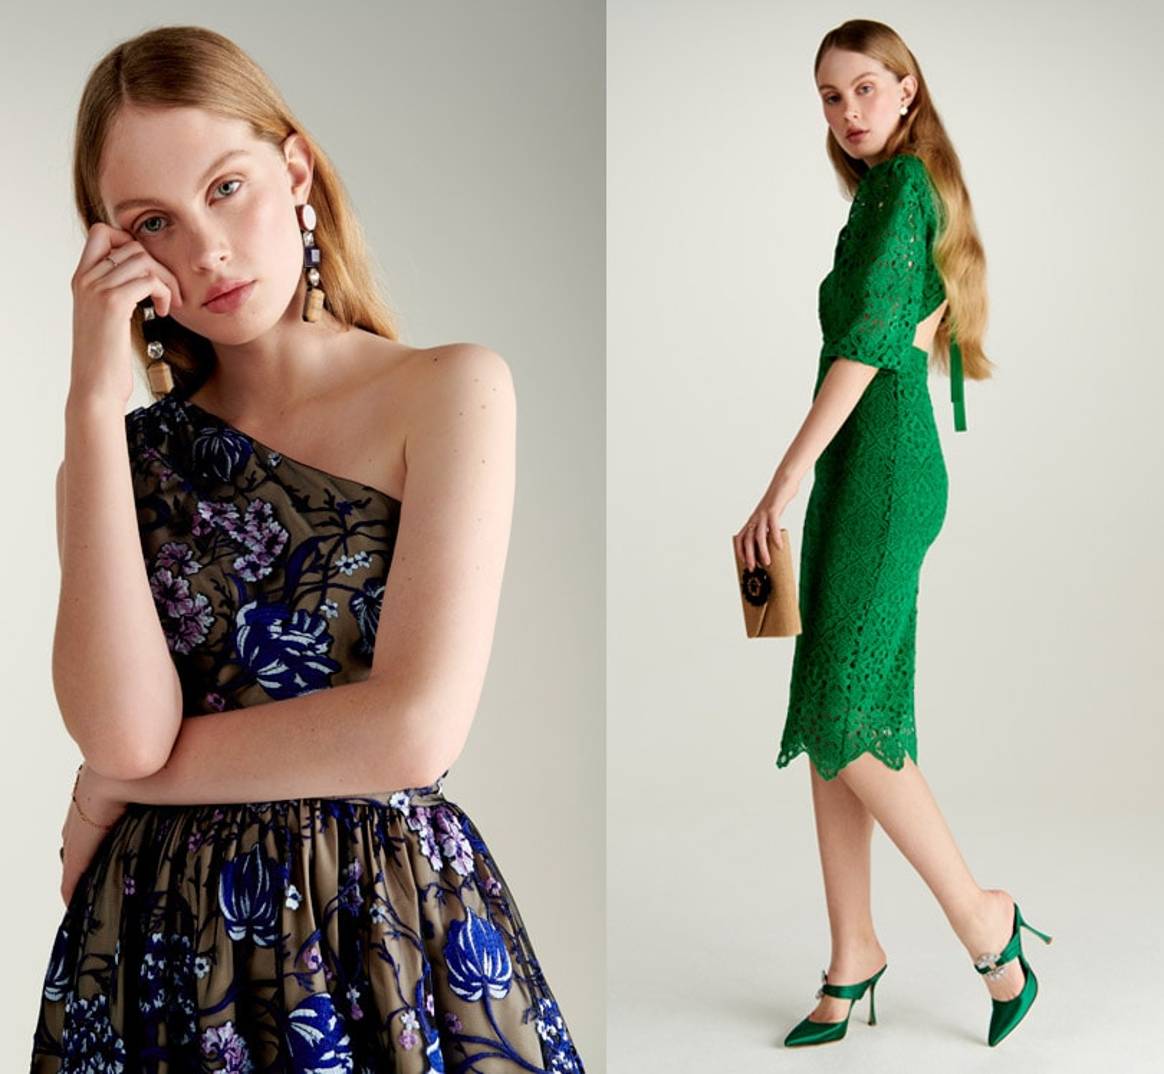 In Pictures: Amazon launches occasion wear brand Truth & Fable